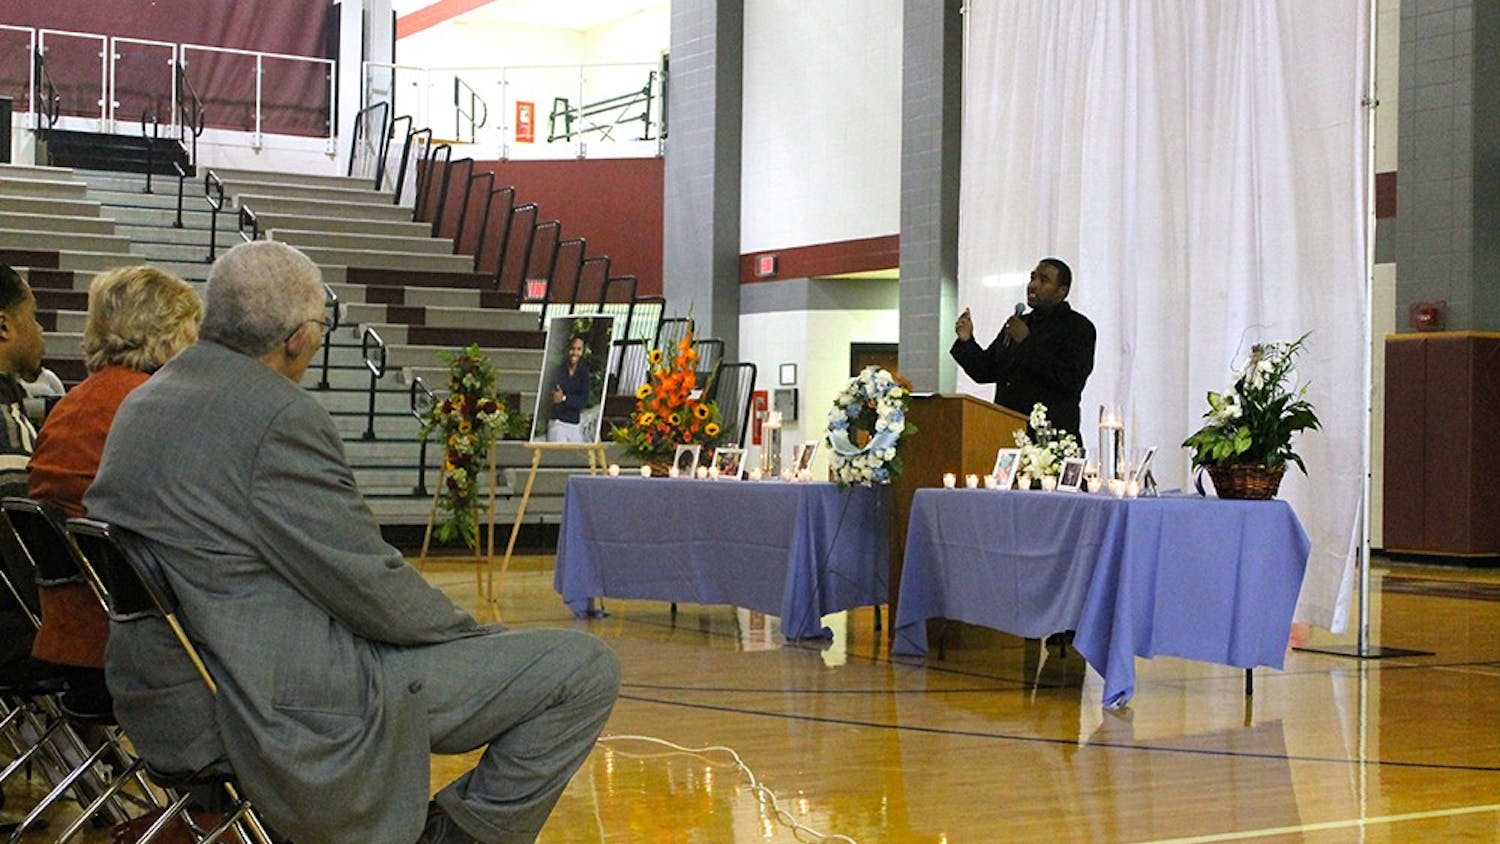 The Rev. Anthony Brown speaks at a memorial service for IU student Joseph Smedley on Saturday at Lawrence Central High School. Smedley's body was found Oct. 2 in Griffy Lake after the student was reported missing Sept. 28.